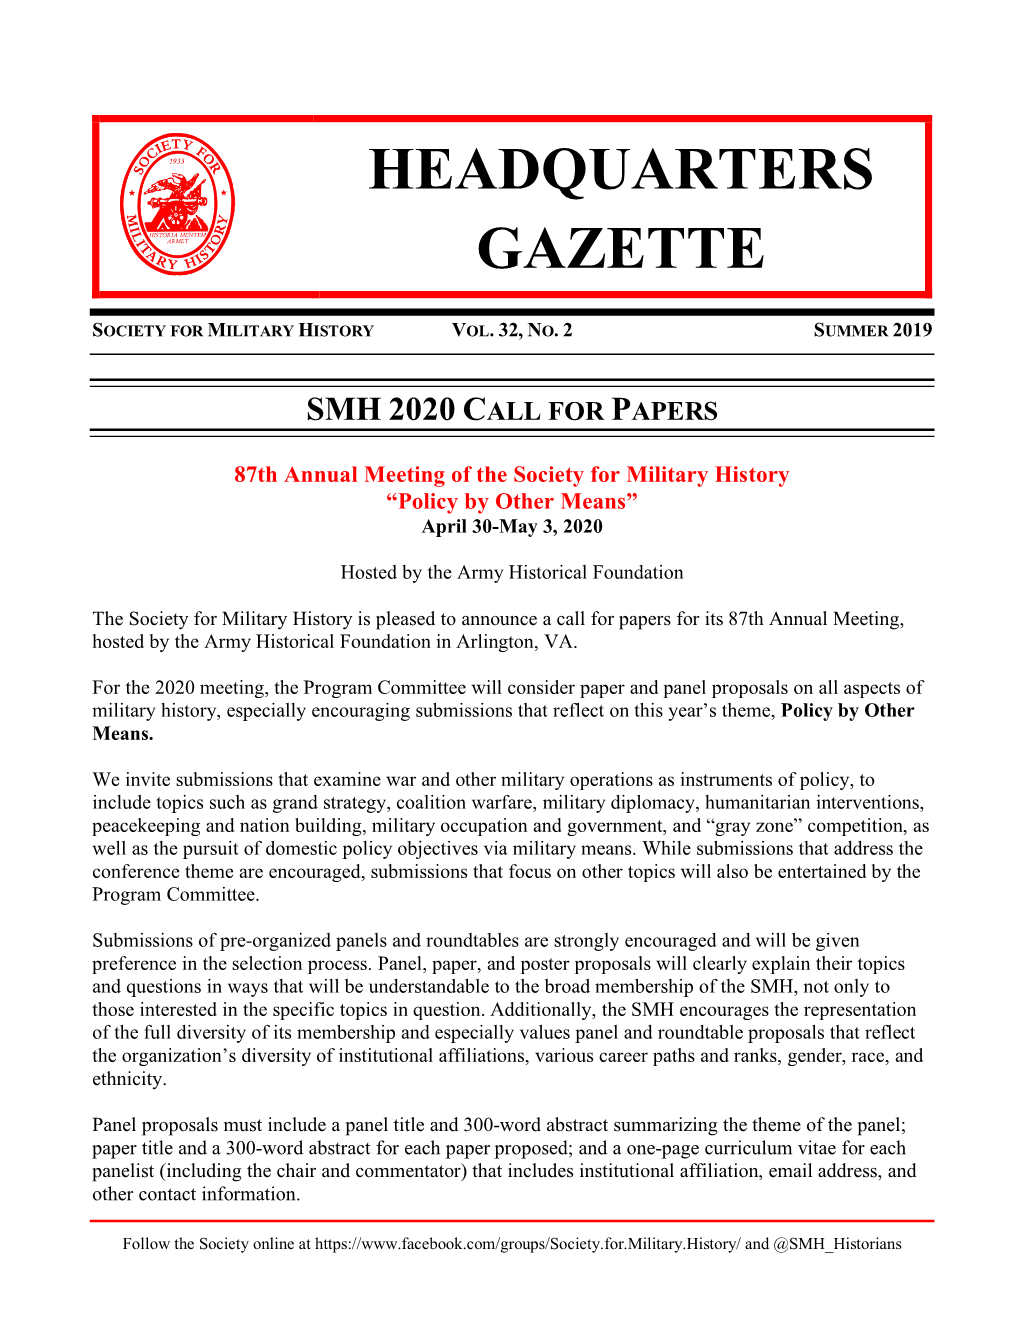 HEADQUARTERS GAZETTE Is a Publication of the Society for Military History